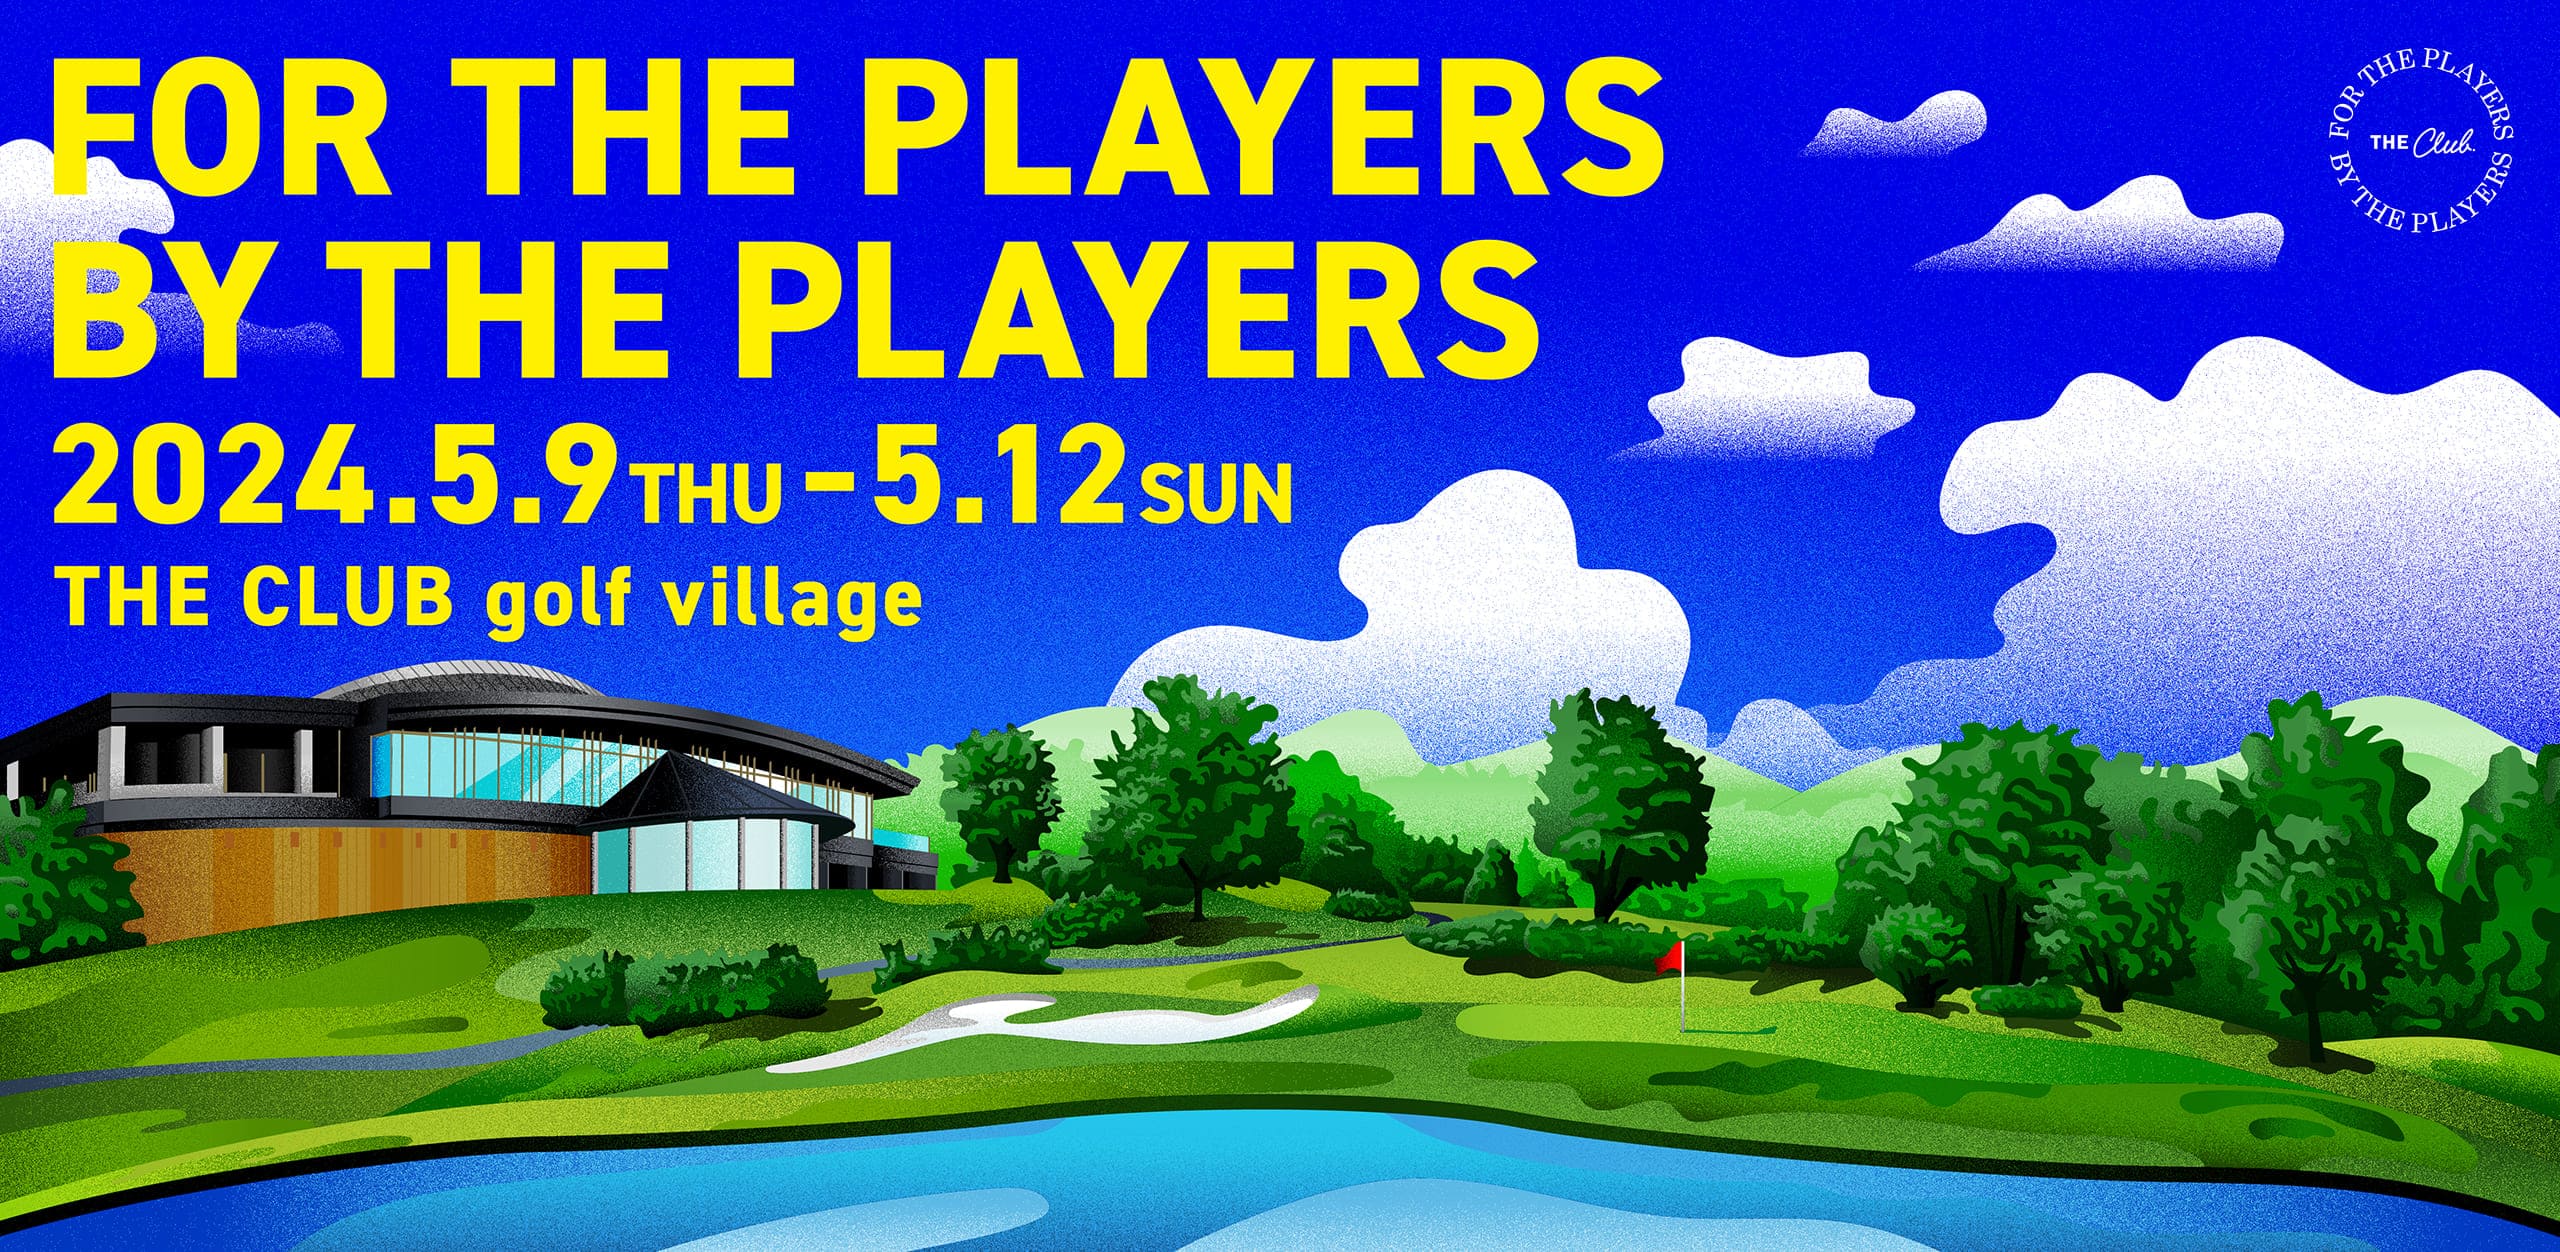 「For The Players By The Players」大会チケット販売を開始しました